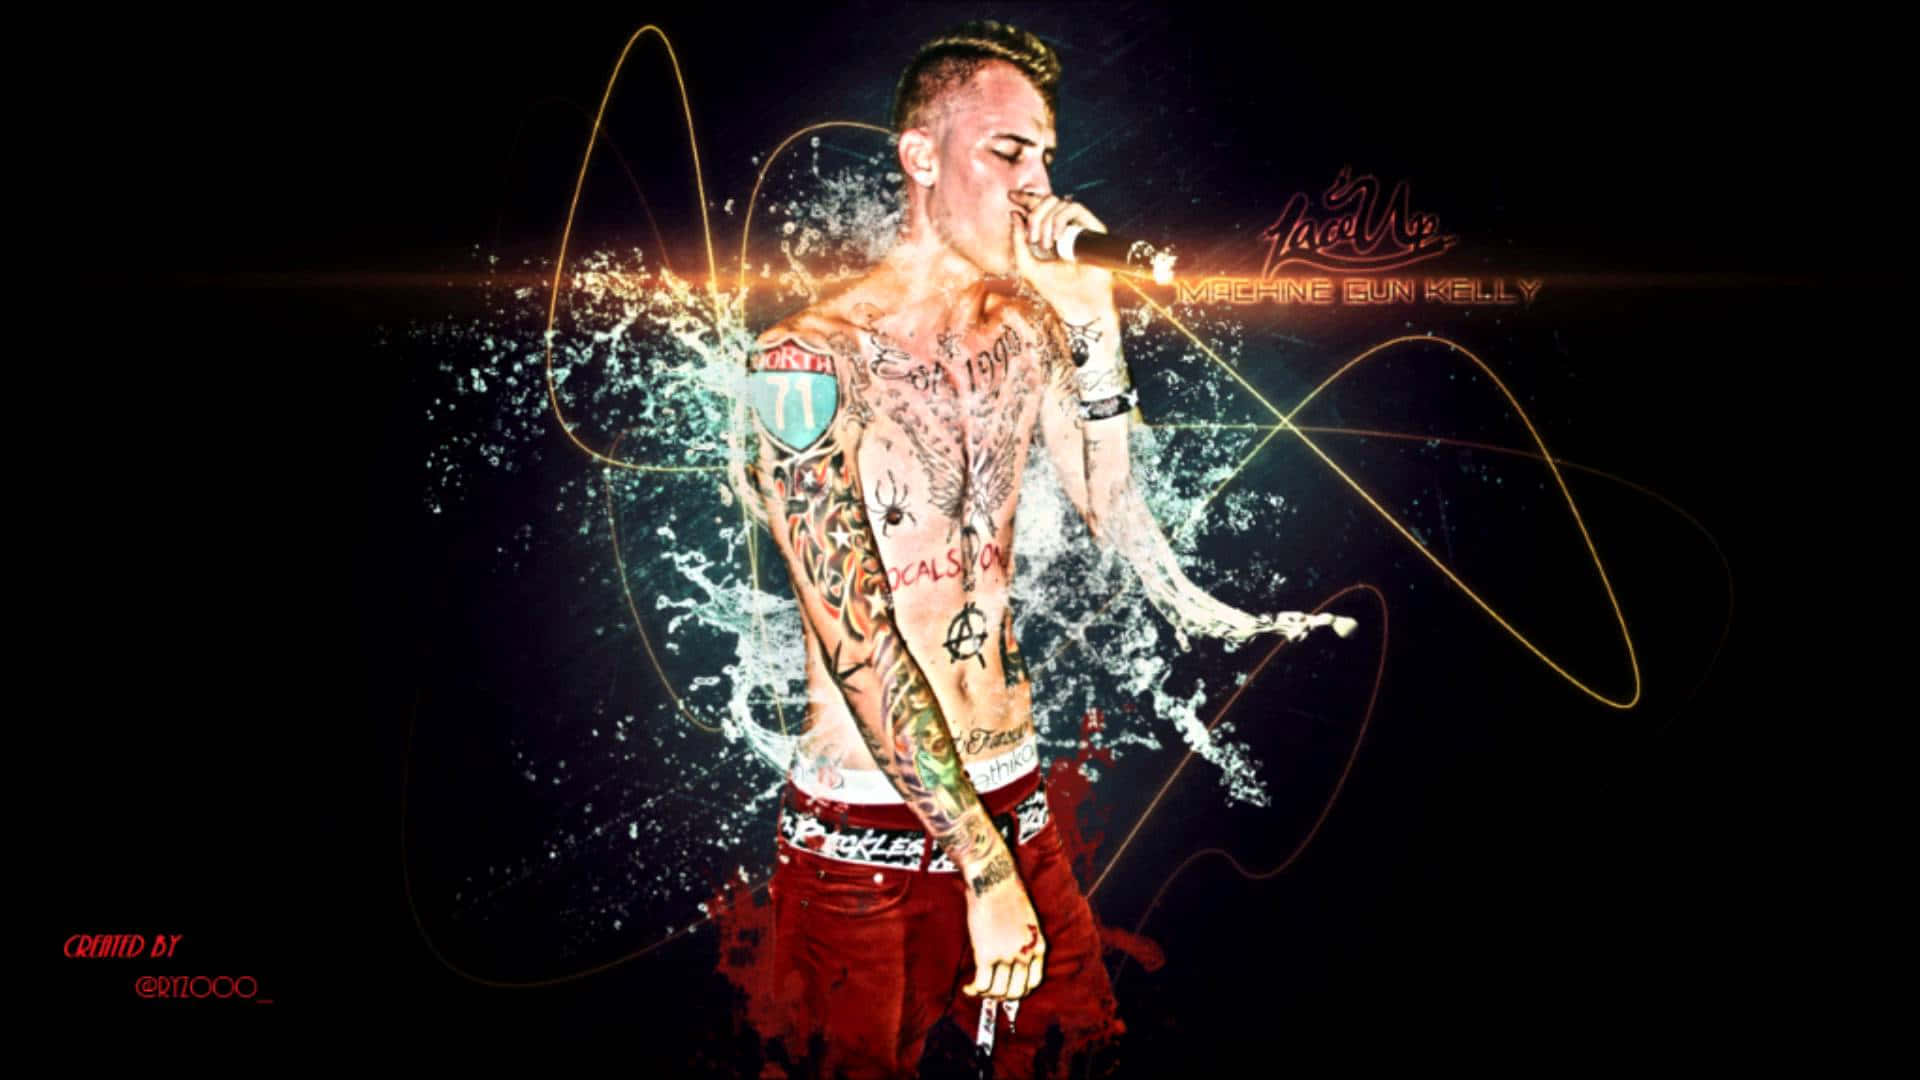 MGK at His Best Wallpaper